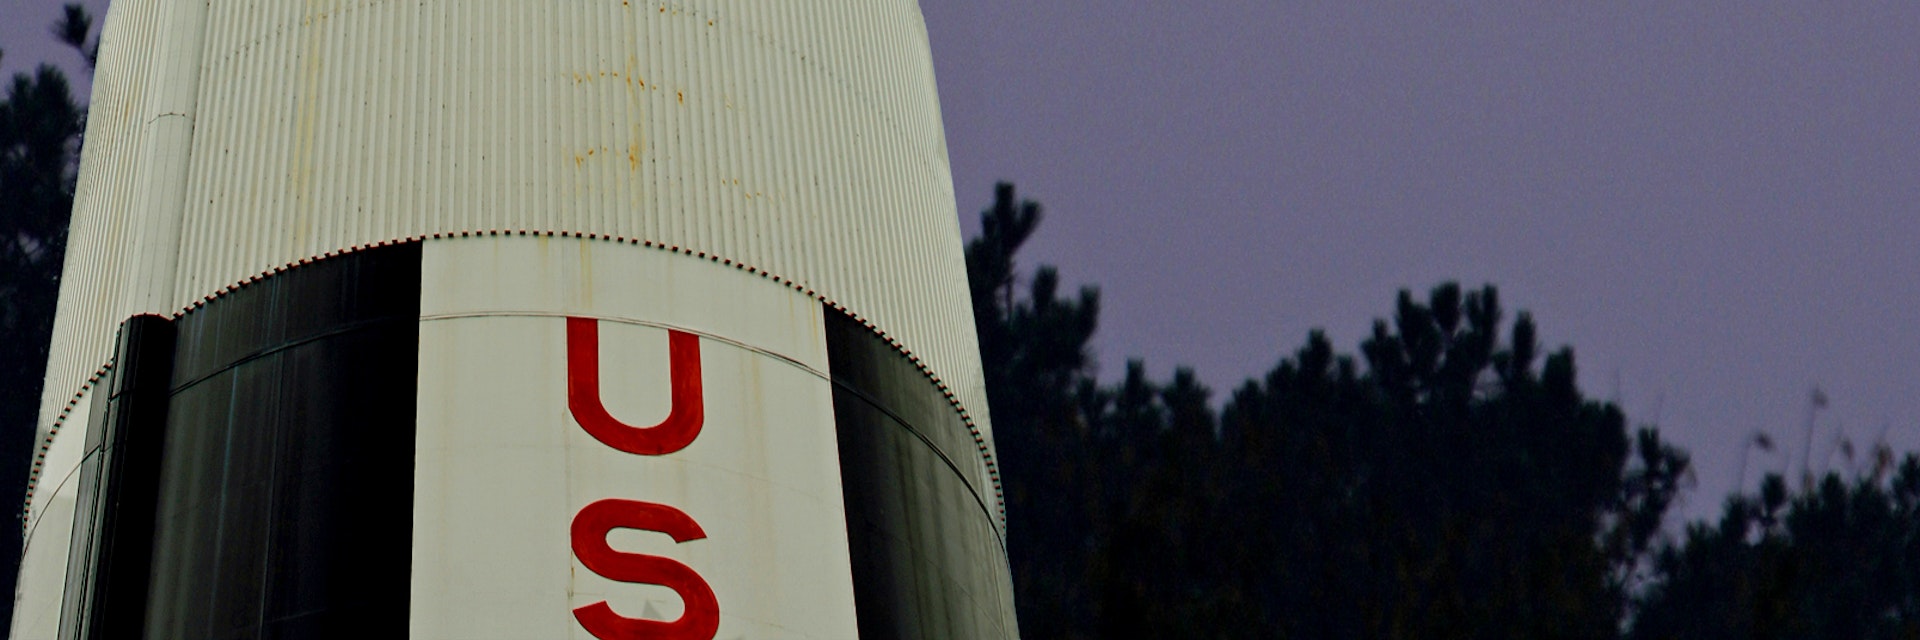 A Saturn 5 rocket appears to be aimming for the moon. The background was taken 10/22/04 at 5:30 pm CST. Taken with a Canon 10D, w/400mm lens set to 400mm. Tv 1/500, Av 8, ISO 400. White balance set to Flurescent. The shot was taken from my front porch in Harvest Al. The Sature 5 was taken 2/17/14 at 2:30 PM CST. at the Space and Rocket center in Huntsville Al. This shot was taken with a canon 7D, with a 28-135 lens set at 28mm. Tv 1/125, Av 6.3, exposure compensation plus 1 and ISO 100. Post process was on the background with PS elements 5, and the rocket with PS element 11 and Perfect photo suite 8.